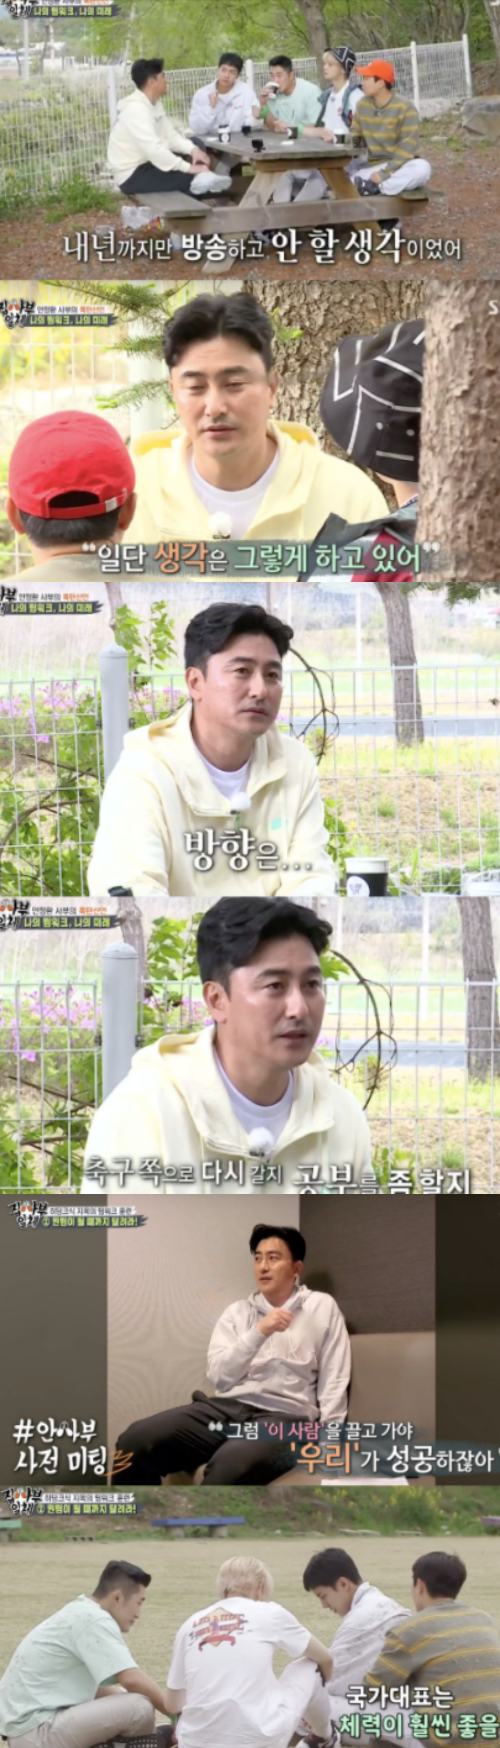 The family also conveyed love for his wife Lee Hye-won and his family in Ahn Jung-hwan, All The Butlers, who said, This Ada Lovelace (Lee Hye-won) is the leader, and also surprised the members and fans by mentioning surprise retirement.Ahn Jung-hwan appeared as master in the SBS entertainment All The Butlers broadcast on the 16th.On this day, Ahn Jung-hwan emphasized, If you do not succeed, you will not have time to rest.Ill give you a nap time when you succeed in training, said Ahn Jung-hwan, announcing the start of the climax training.The four of them had to come in within 20 seconds, and Yang said, I can not win because of me, I can not run well.Sure enough, the gap widened with the fastest Cha Eun-woo, and he raced through each battle. Eventually, 25 seconds was frustrated by the result.Lee Seung-gi, in an interview with the production team, complained, I did not see the purpose, why I wanted to continue. Ahn Jung-hwan said, I am glad that we have to drag the slow people to succeed, and when we all came in together, he said, When we were together without anyone falling, training was harder (the team became more sticky).While the members were resting, Ahn Jung-hwan prepared Samgyetang special for the members.However, each member whose hands were tied up was worried about how to eat.In the end, he gave up one arm and showed consideration, and Ahn Jung-hwan said, Training is going well. If I give up one, I can get courage at the same time.The members shouted We are one and showed warmth.Lee Seung-gi said, There are many sports stars in Korea, but there is a star named Ahn Jung-hwan, so it is not Hero of Hero, but it is different from Park Ji-sung, but star is more cool than star and Hero, star should be born.Ahn Jung-hwan said, Is not Hero good for anyone?I came here, but Ji Sung tells me, then call Ji Sung. He was jealous and said that he was his brother to Park Ji-sung.When Park Ji-sung said, Is not he a senior?, Ahn Jung-hwan added, If you have more money than me, you are called a brother to Son Heung-min.Kim Dong-Hyun said, If someone is a role model, it is Ahn Jung-hwan rather than Park Ji-sung. However, Ahn Jung-hwan said, Why do you put the name of Park Ji-sung in the afternoon? Cha Eun-woo said, Honaldo, Wan Segal and smiled at Ahn Jung-hwan and calmed his mind.Eventually, Ahn Jung-hwan and members decided to face off over afternoon training; they decided to drop the training immediately after the team won.With Ahn Jung-hwan being pushed 2-1, Ahn Jung-hwan said, I will do it really, but eventually lost the penalty shoot-out strategy of the four members, and the winning members were delighted that they did not train.Above all, Ahn Jung-hwan expressed his love for his wife, saying, The family is another team, this Ada Lovelace (Lee Hye-won), and expressed his love for his wife. If I was alone, I would have been ruined, and if I did not marry, I would have lived a lot of corrupt life.I wasnt going to broadcast it until next year, Confessions said, but Im not sure whether Im going back to football, whether Im going to study, or whether Im going to continue broadcasting, but whether Im a coach or not, my plan is for now.In the meantime, Ahn Jung-hwan said, I will not stop immediately from the line that does not get away with the work now, and it will damage.Capture All The Butlers Broadcast Screen